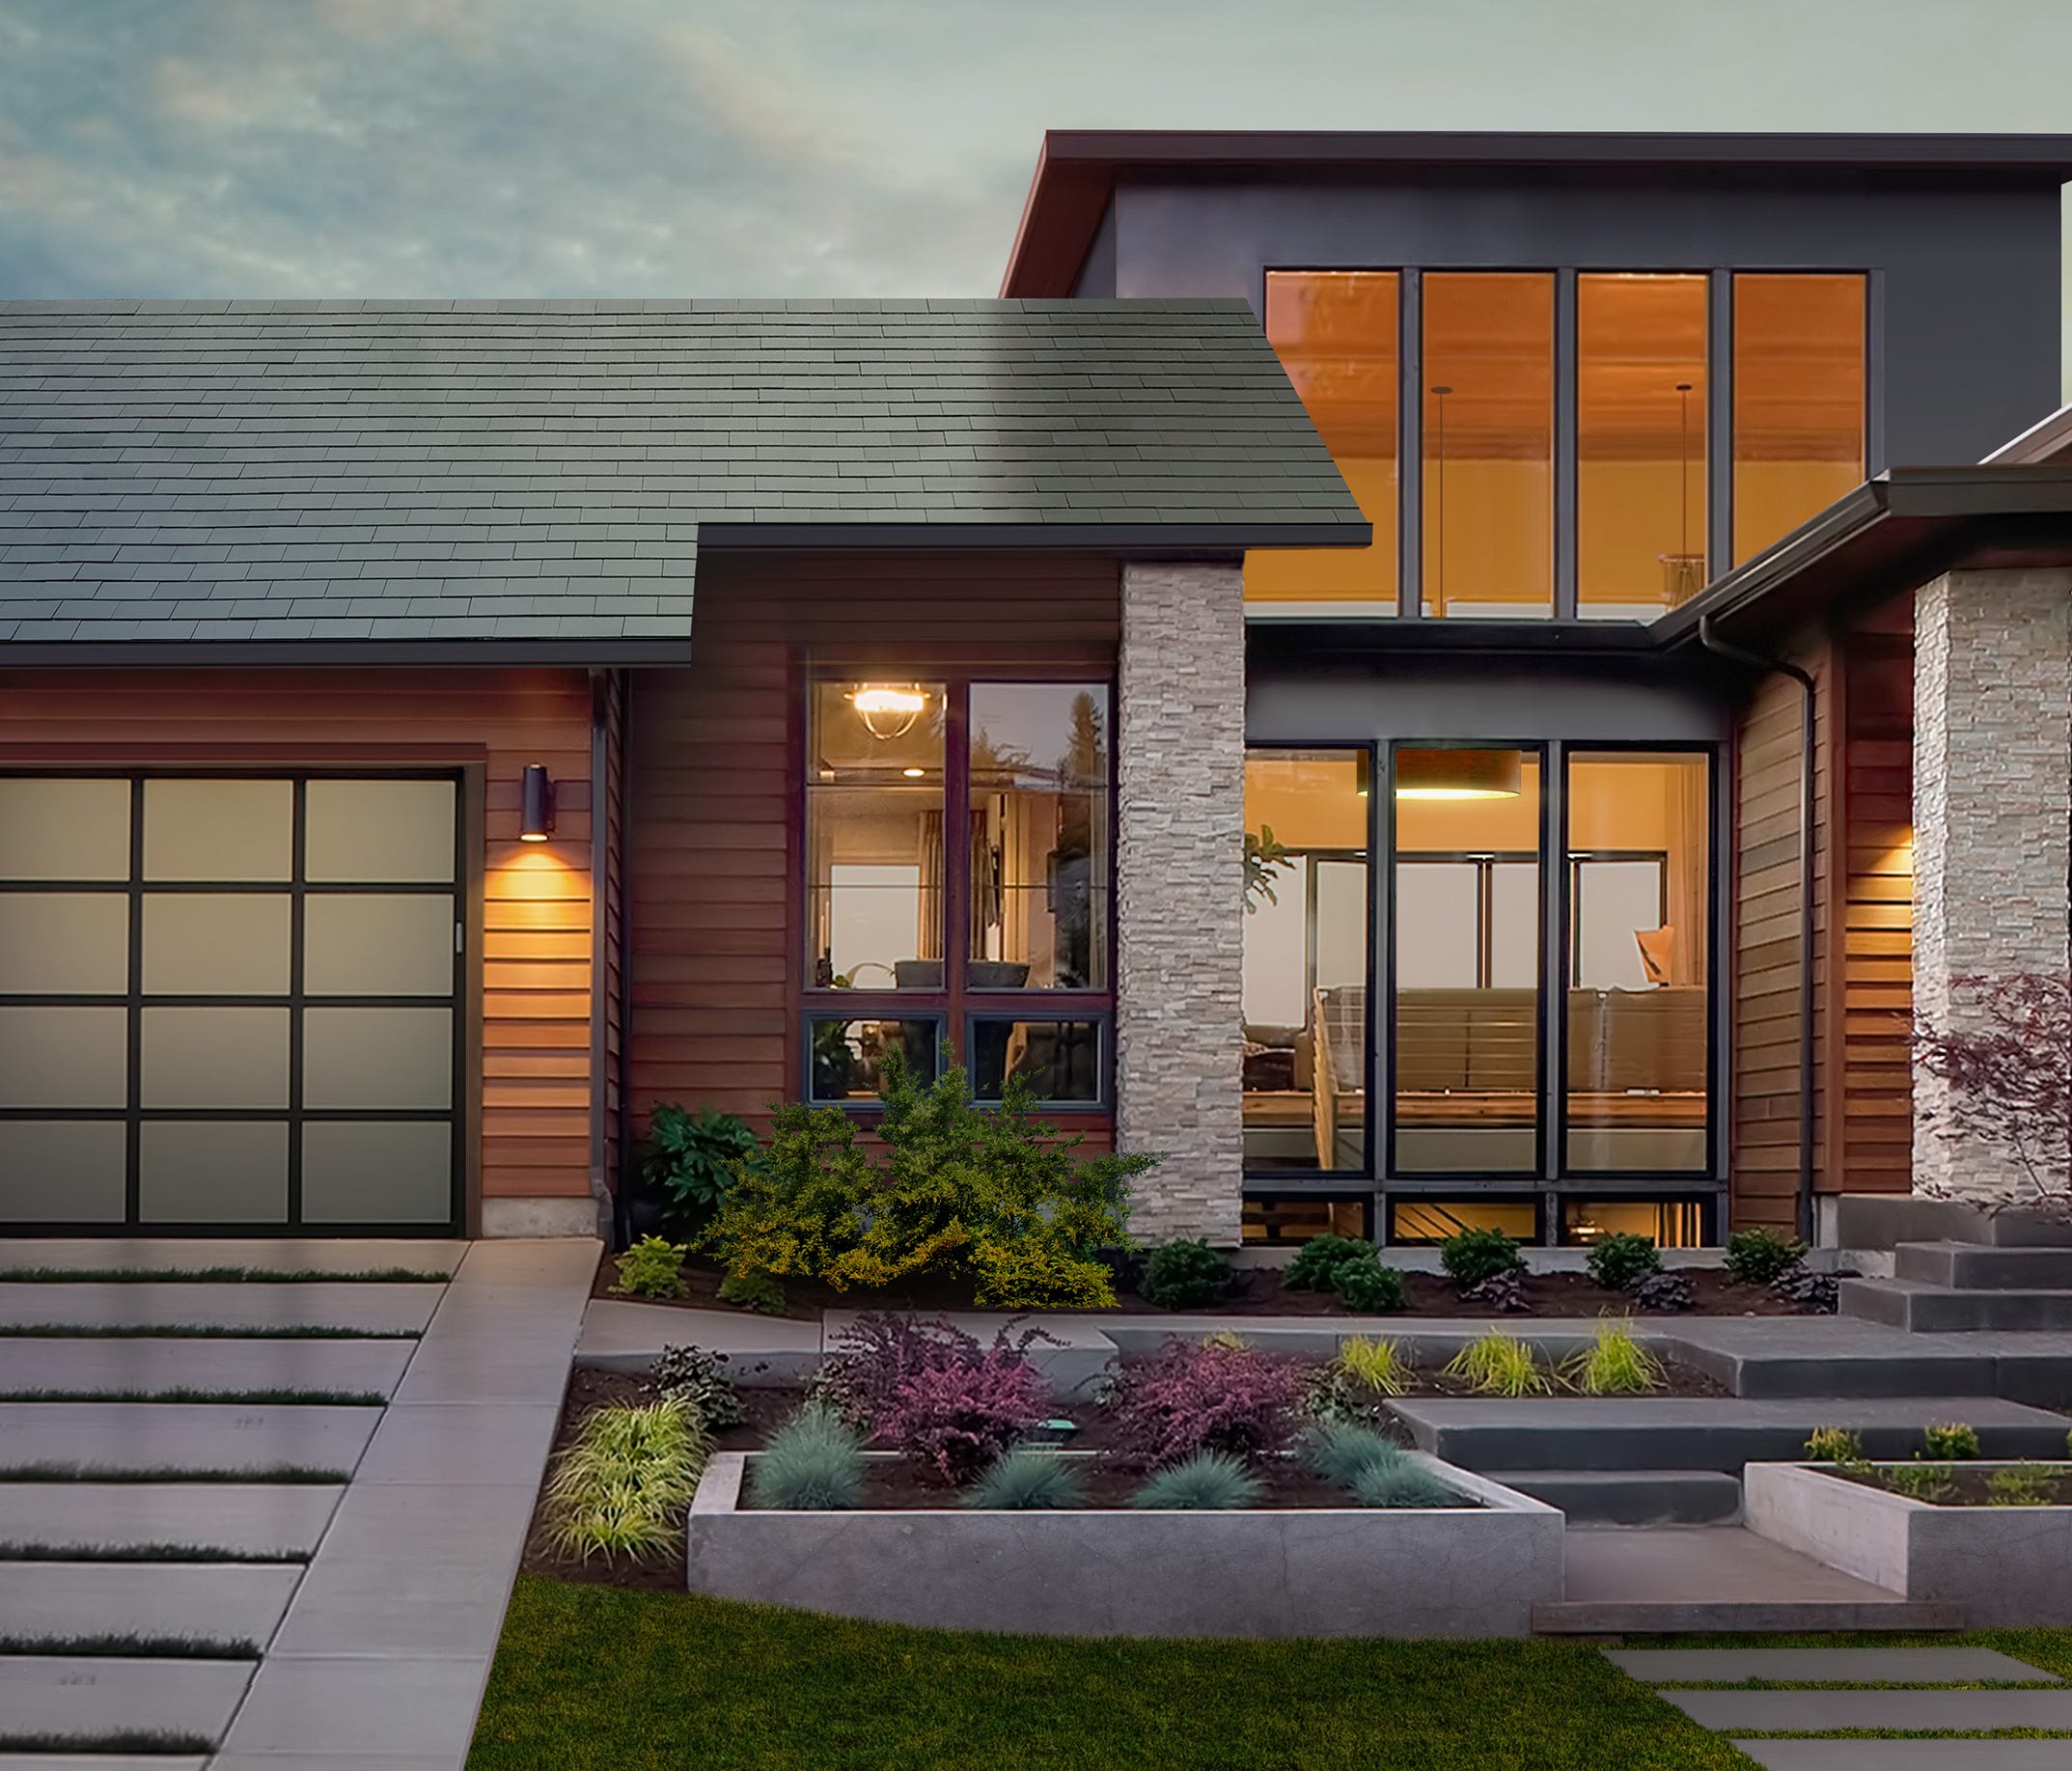 Tesla is now taking preorders for its Solar Roof, and has a Powerwall battery to store excess energy to use at night or as backup power.